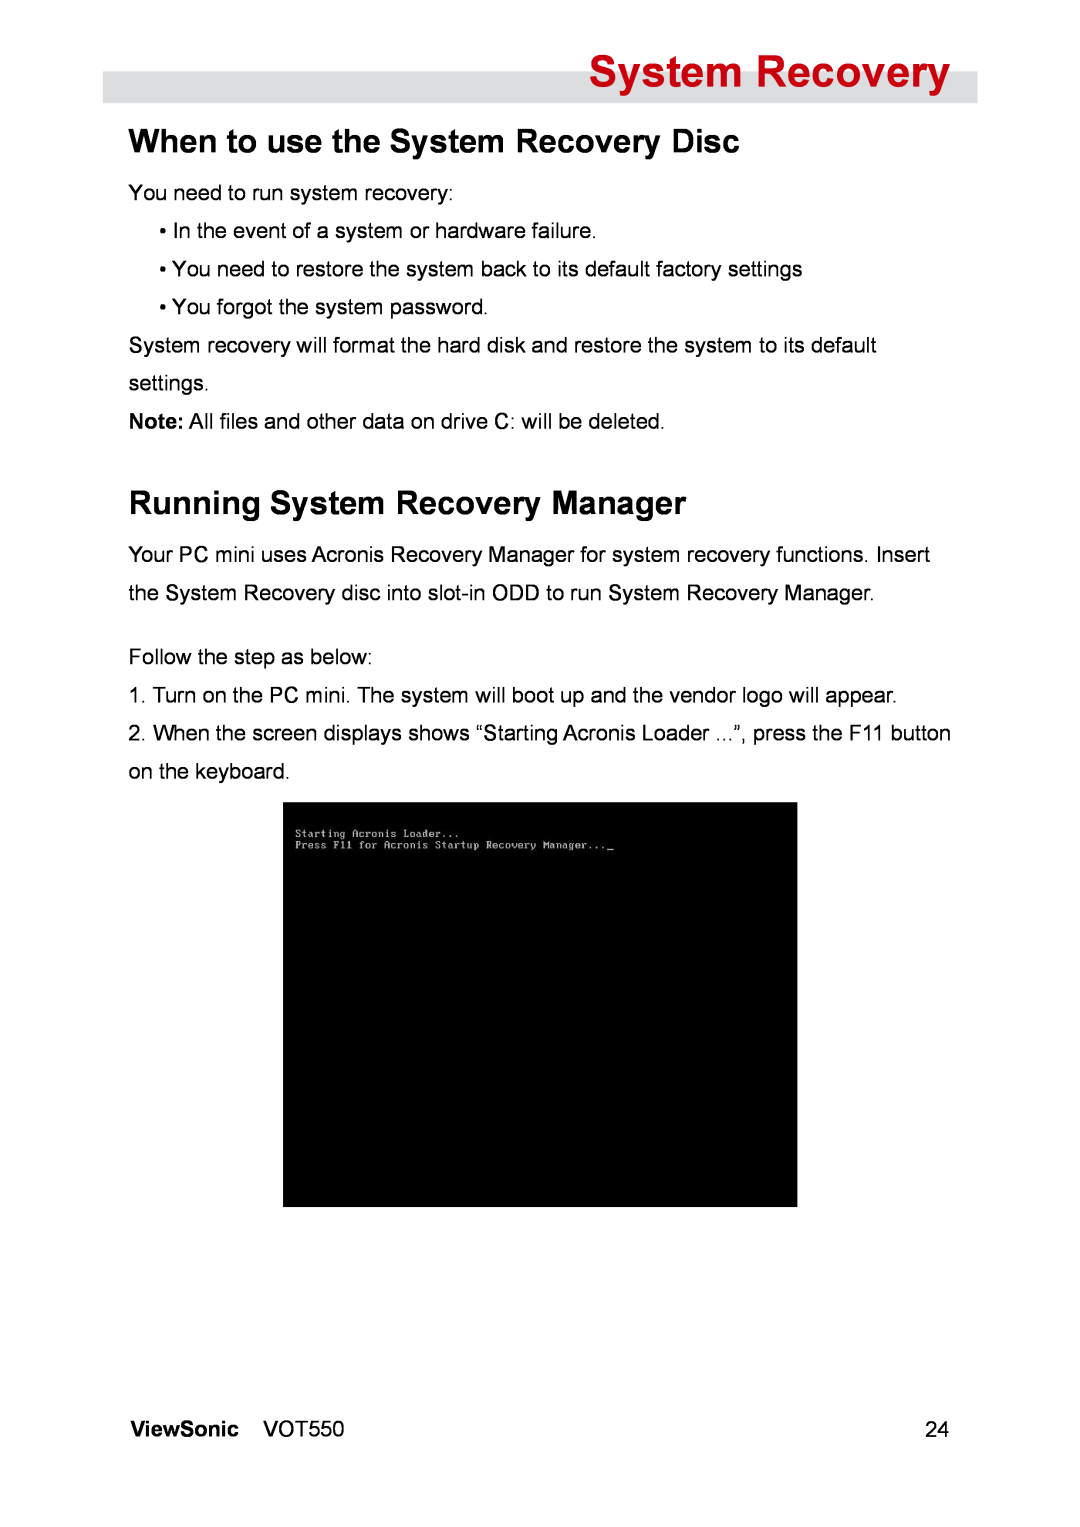 ViewSonic manual When to use the System Recovery Disc, Running System Recovery Manager, ViewSonic VOT550 